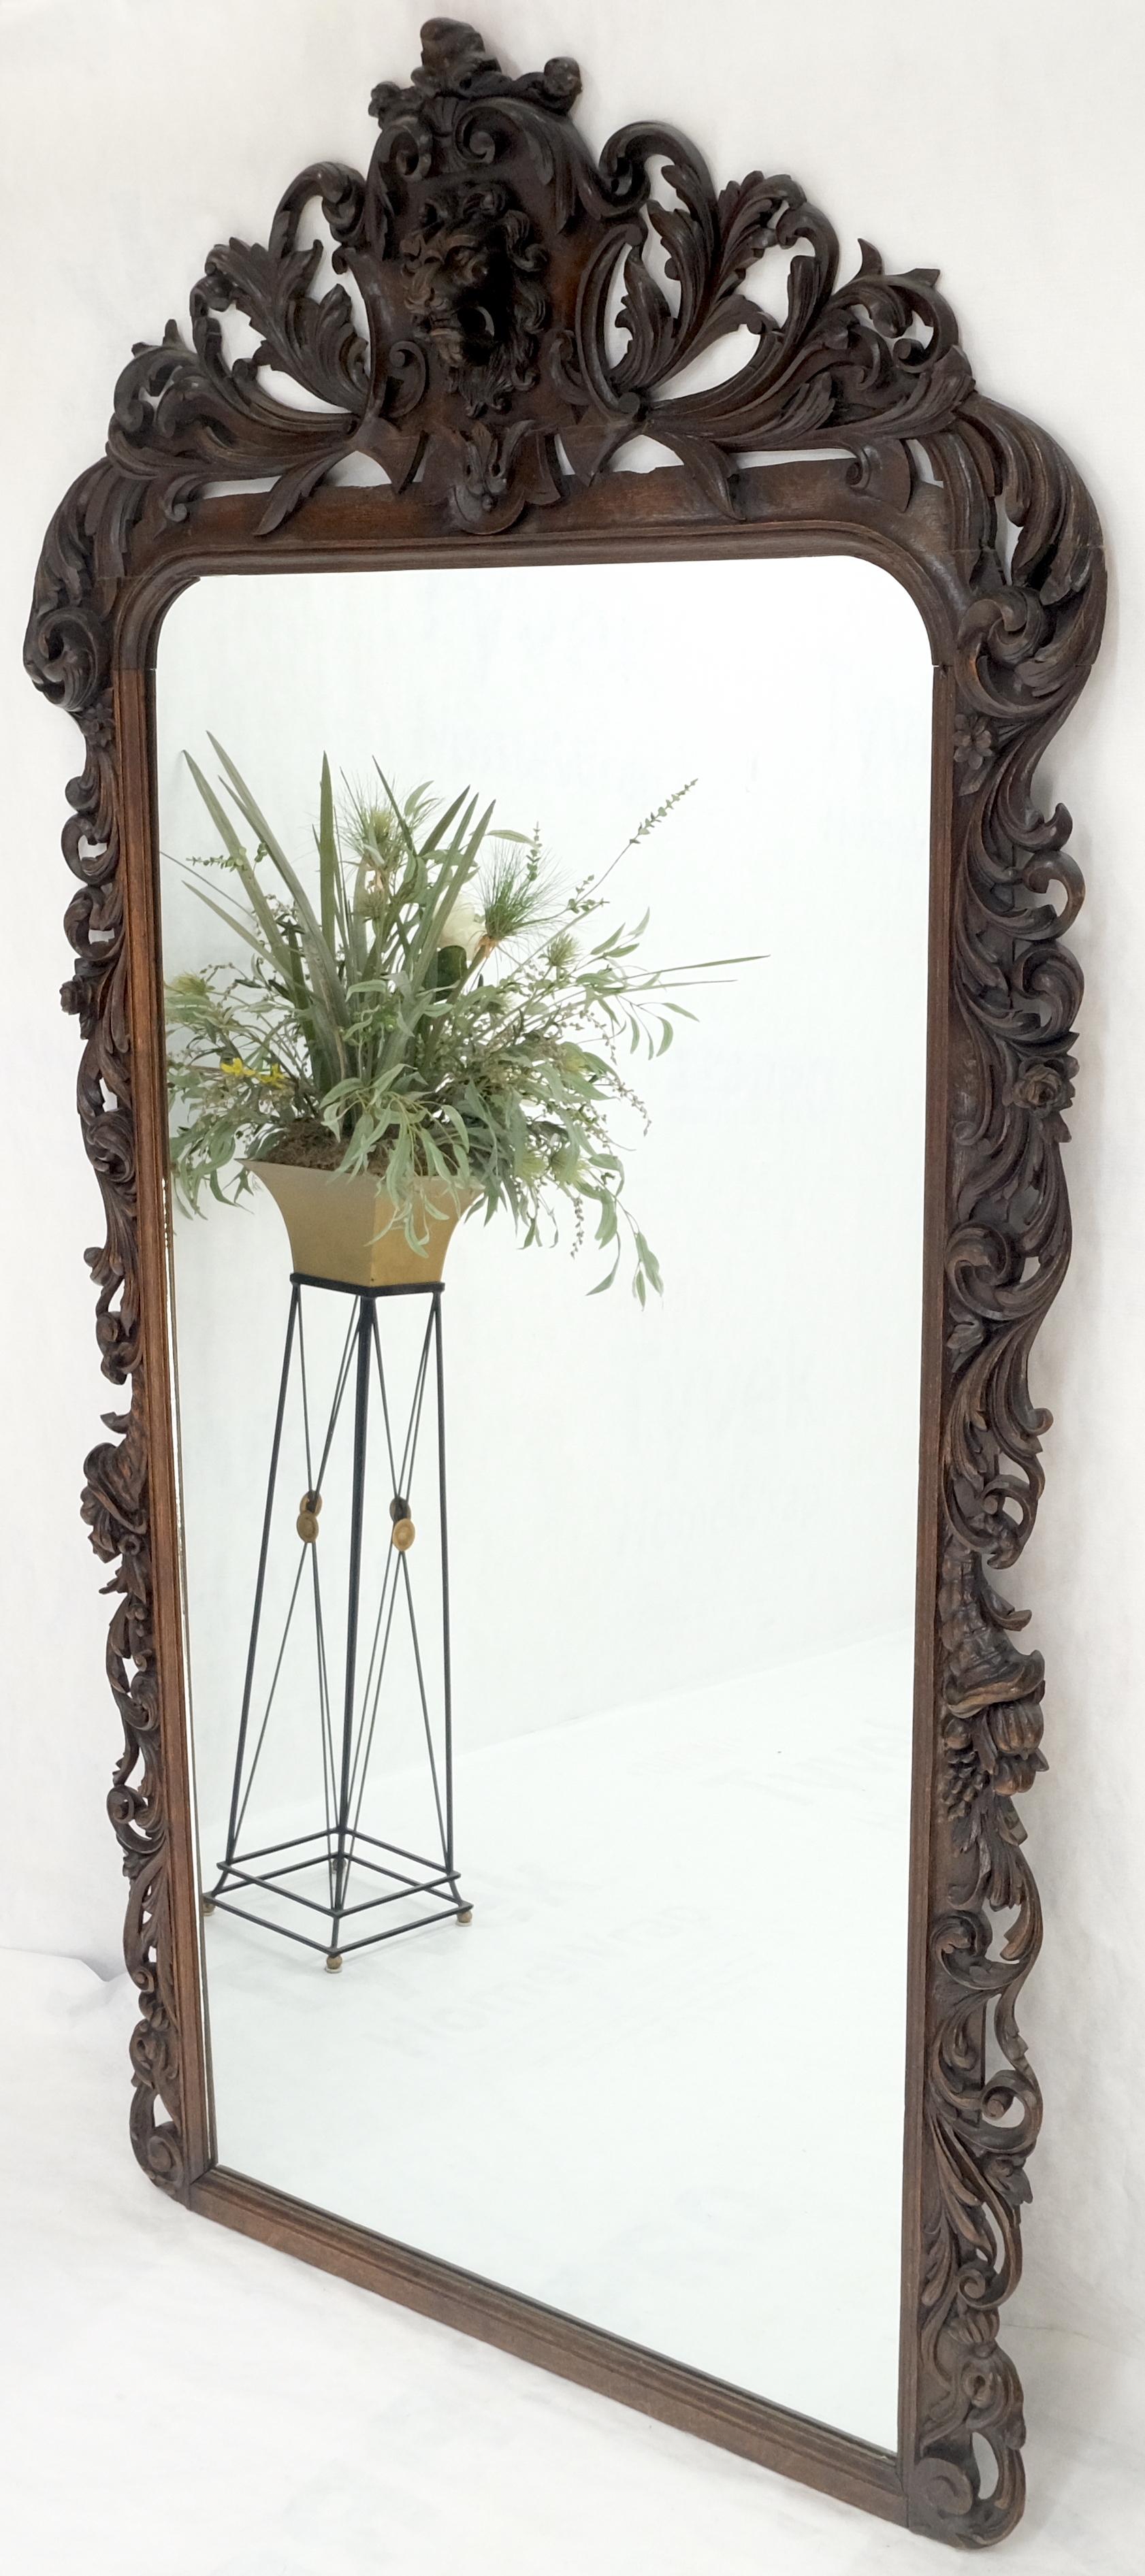 Baroque Revival North Winds Standing 8 Feet Tall Heavily Carved Oak Floor Wall Mirror Clean! For Sale